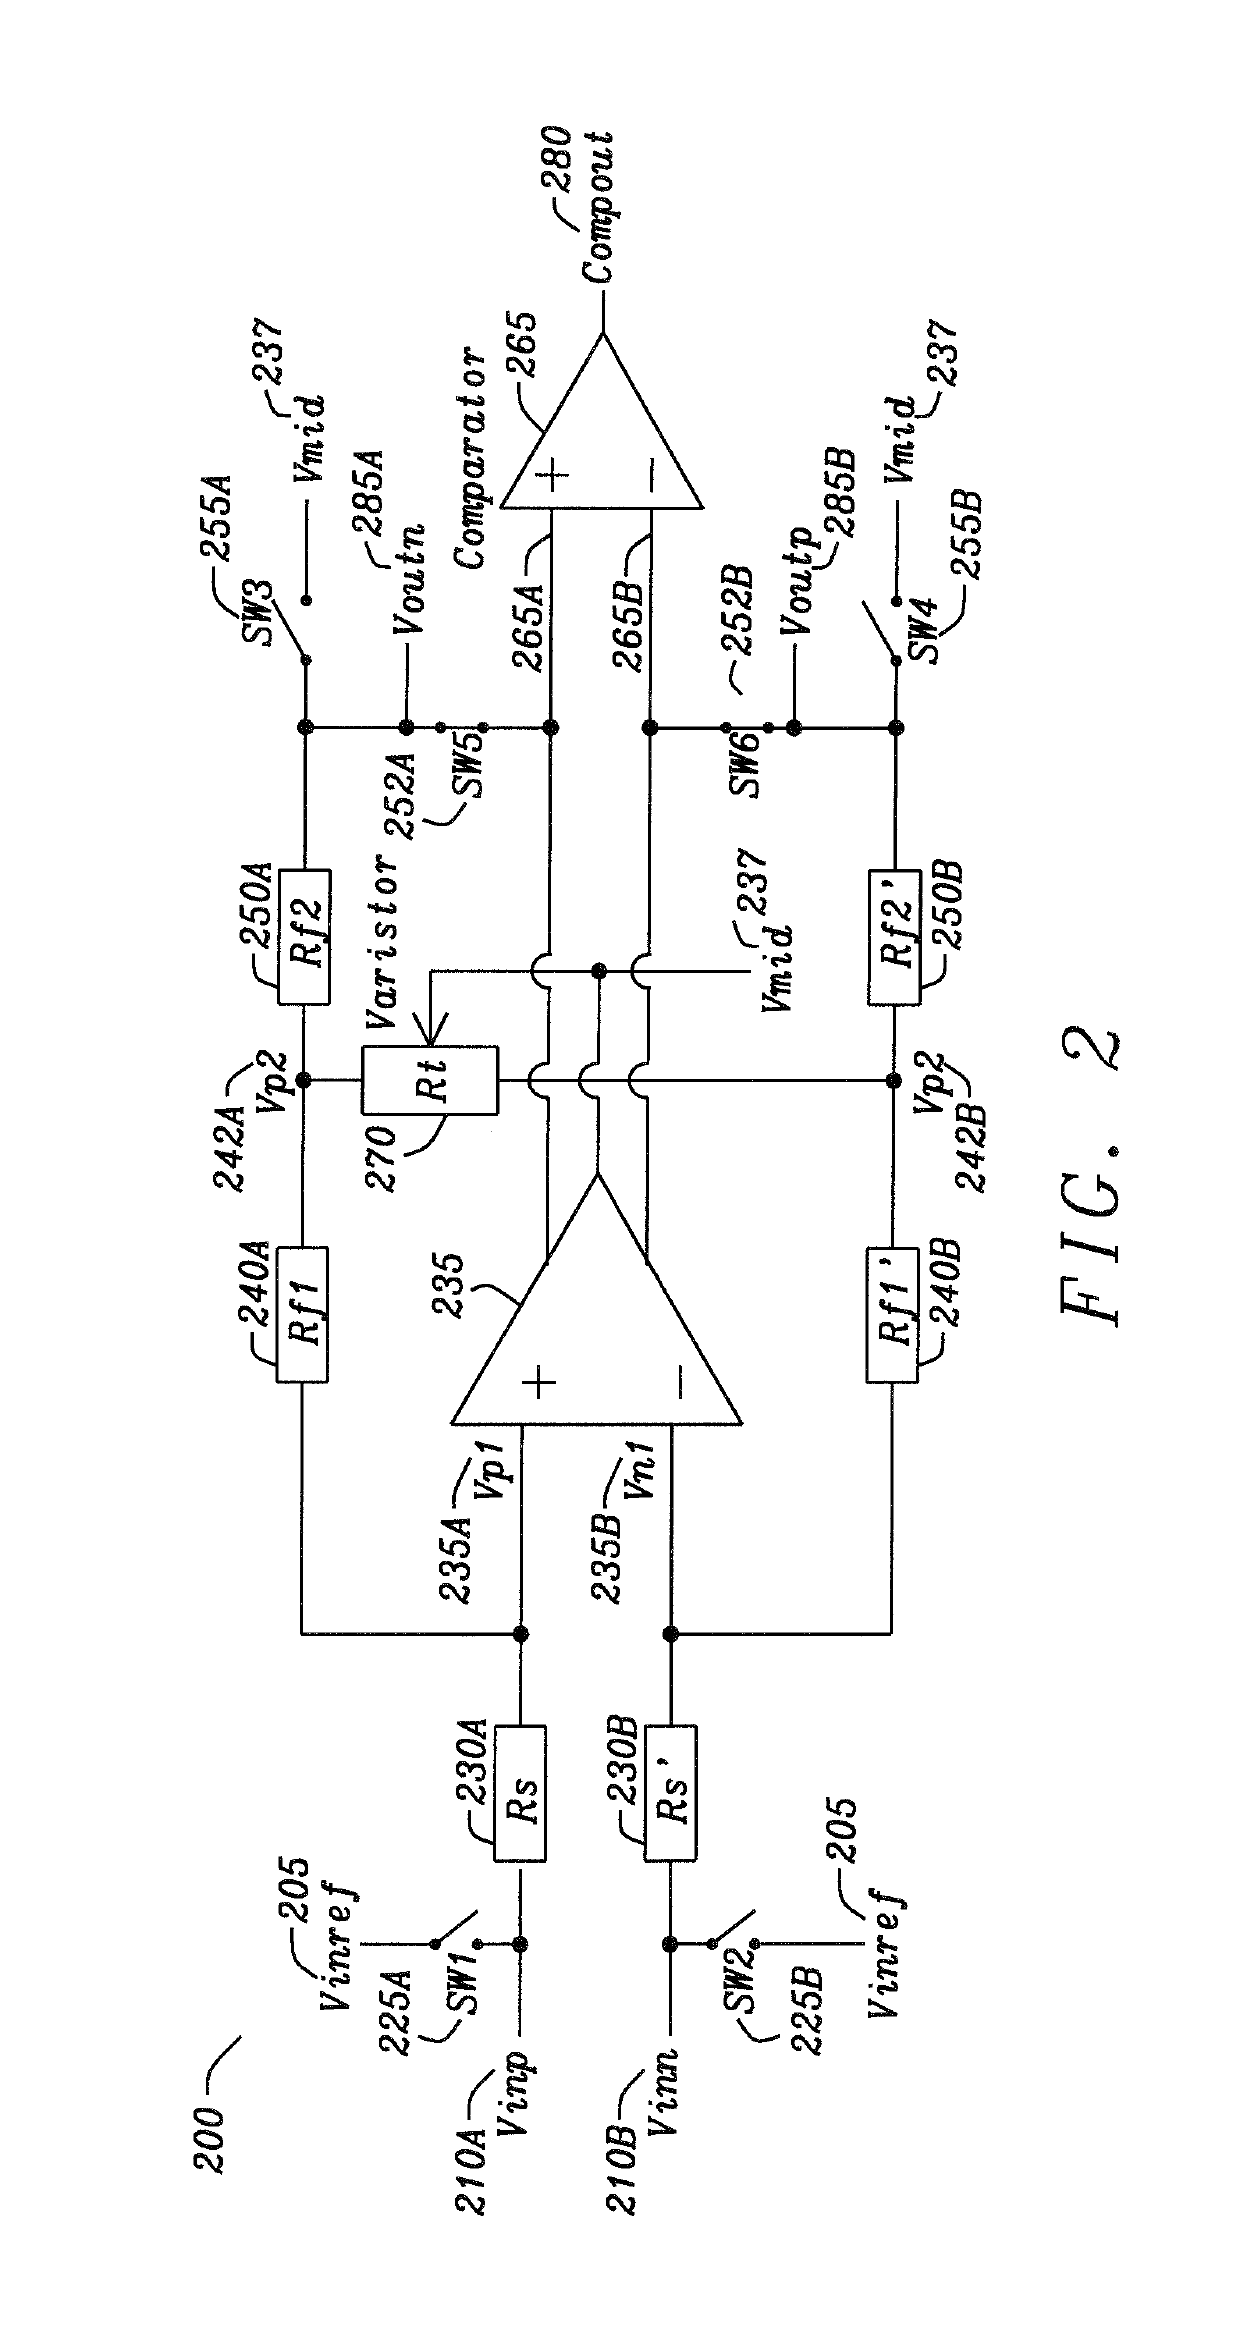 Circuit and method for a high common mode rejection amplifier by using a digitally controlled gain trim circuit